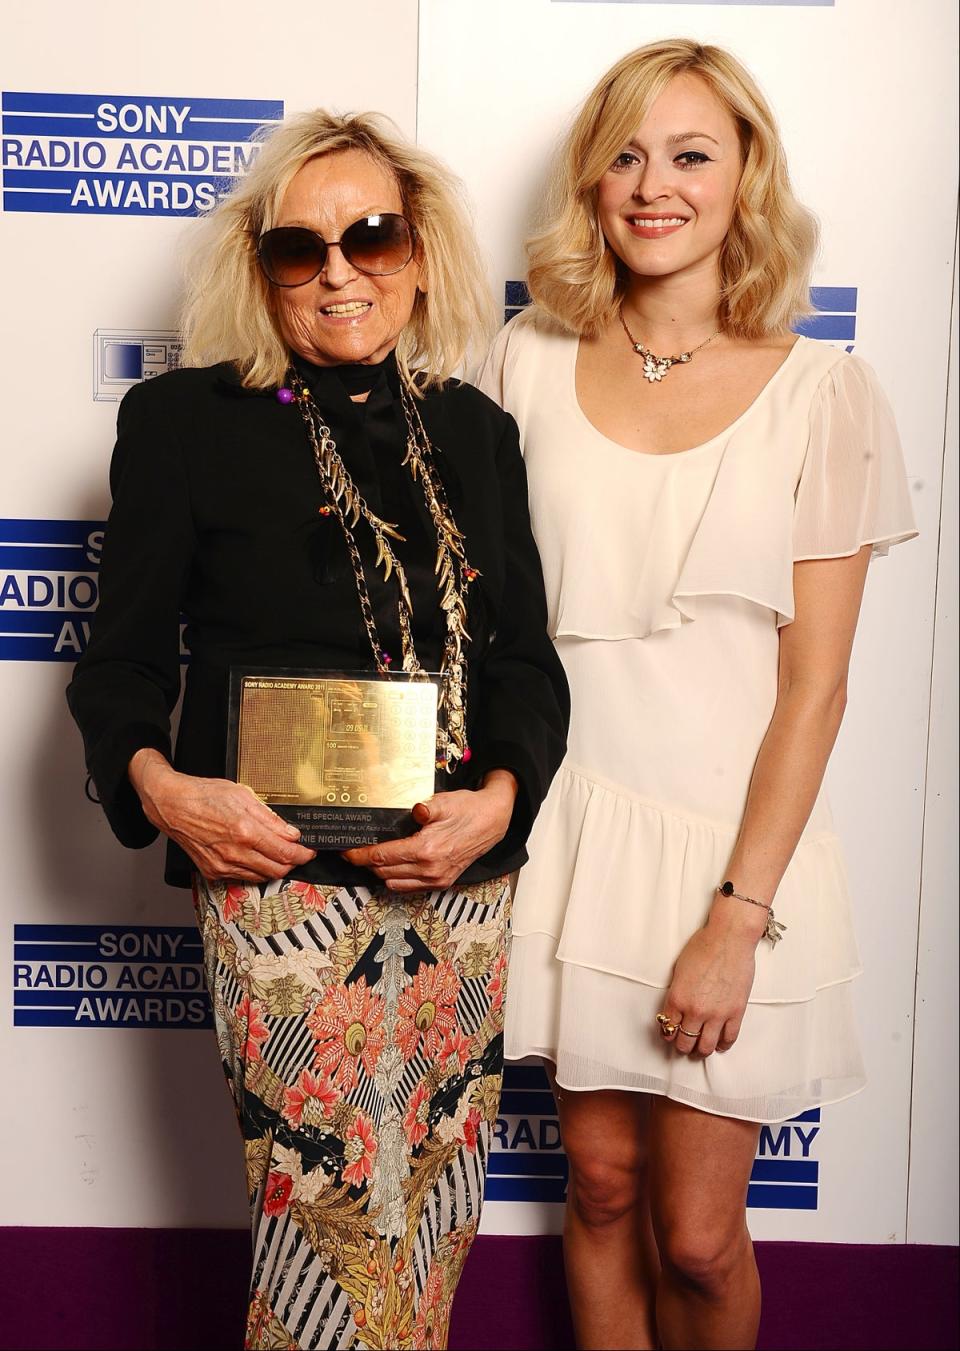 Nightingale and fellow broadcaster Fearne Cotton with the Special Award, at the Sony Radio Academy Awards in 2011 (PA)